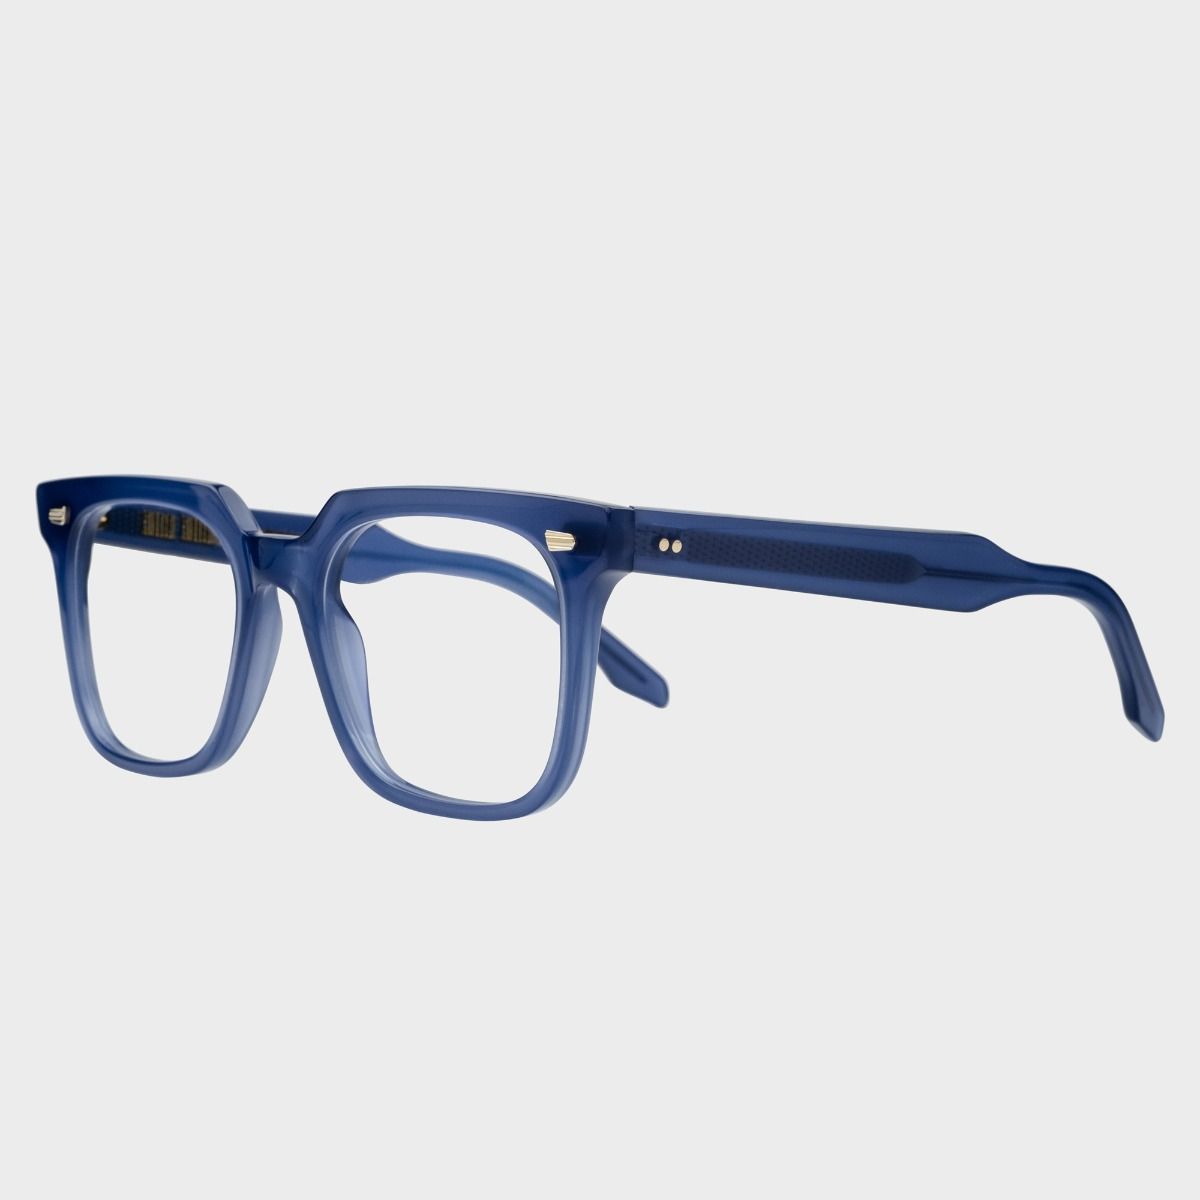 Cutler and Gross, 1387 Optical Square Glasses - Bowery Blue